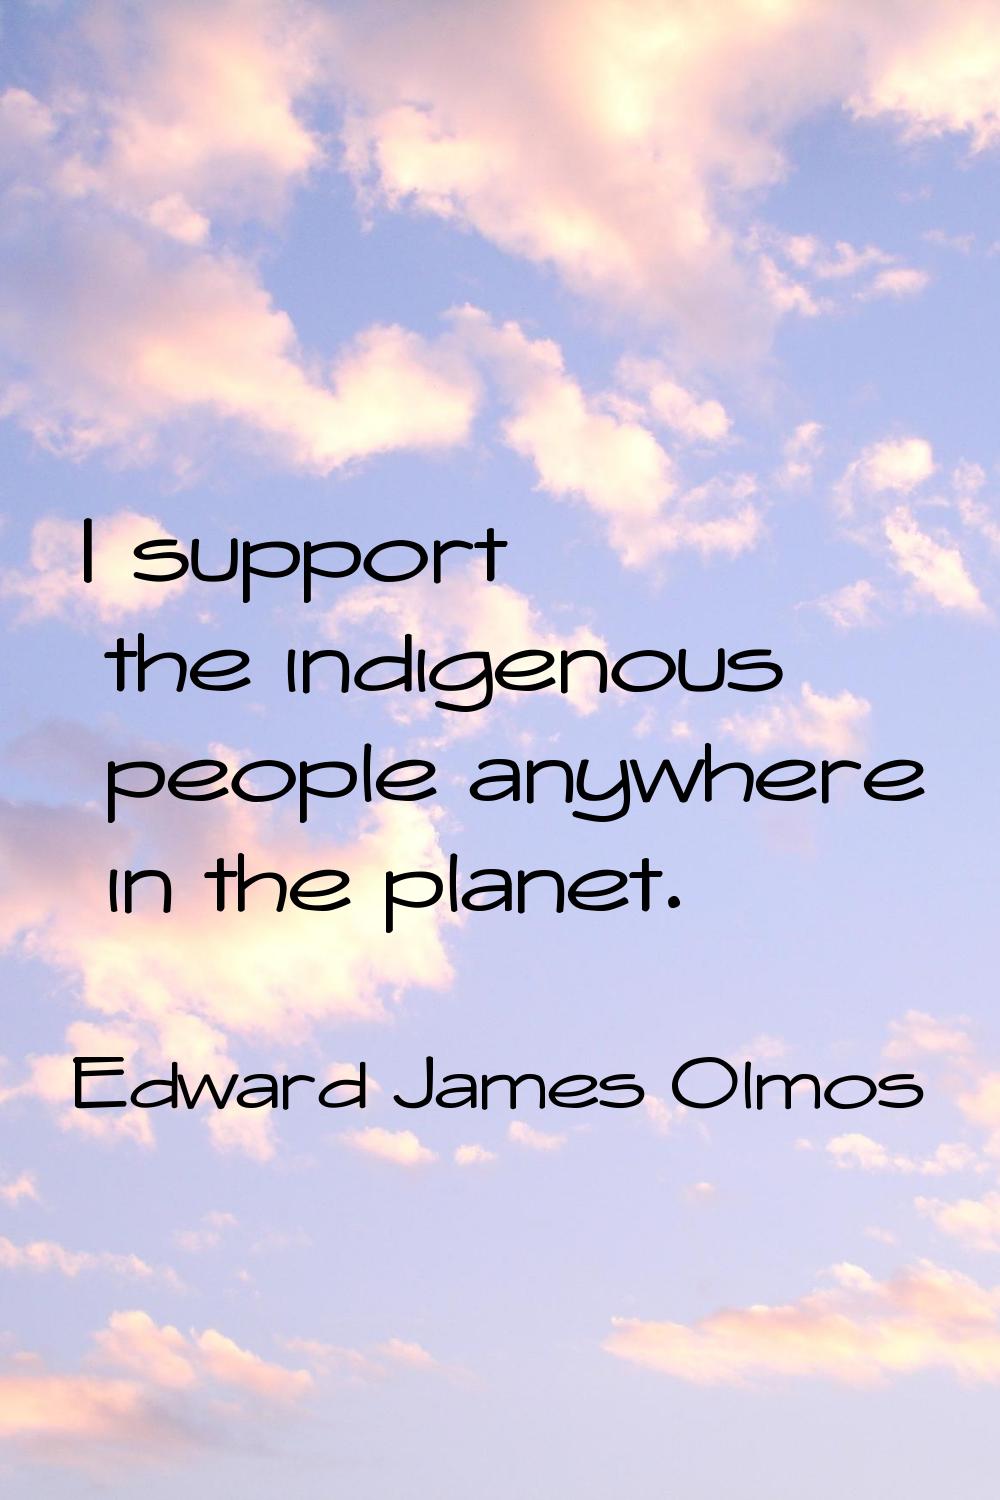 I support the indigenous people anywhere in the planet.